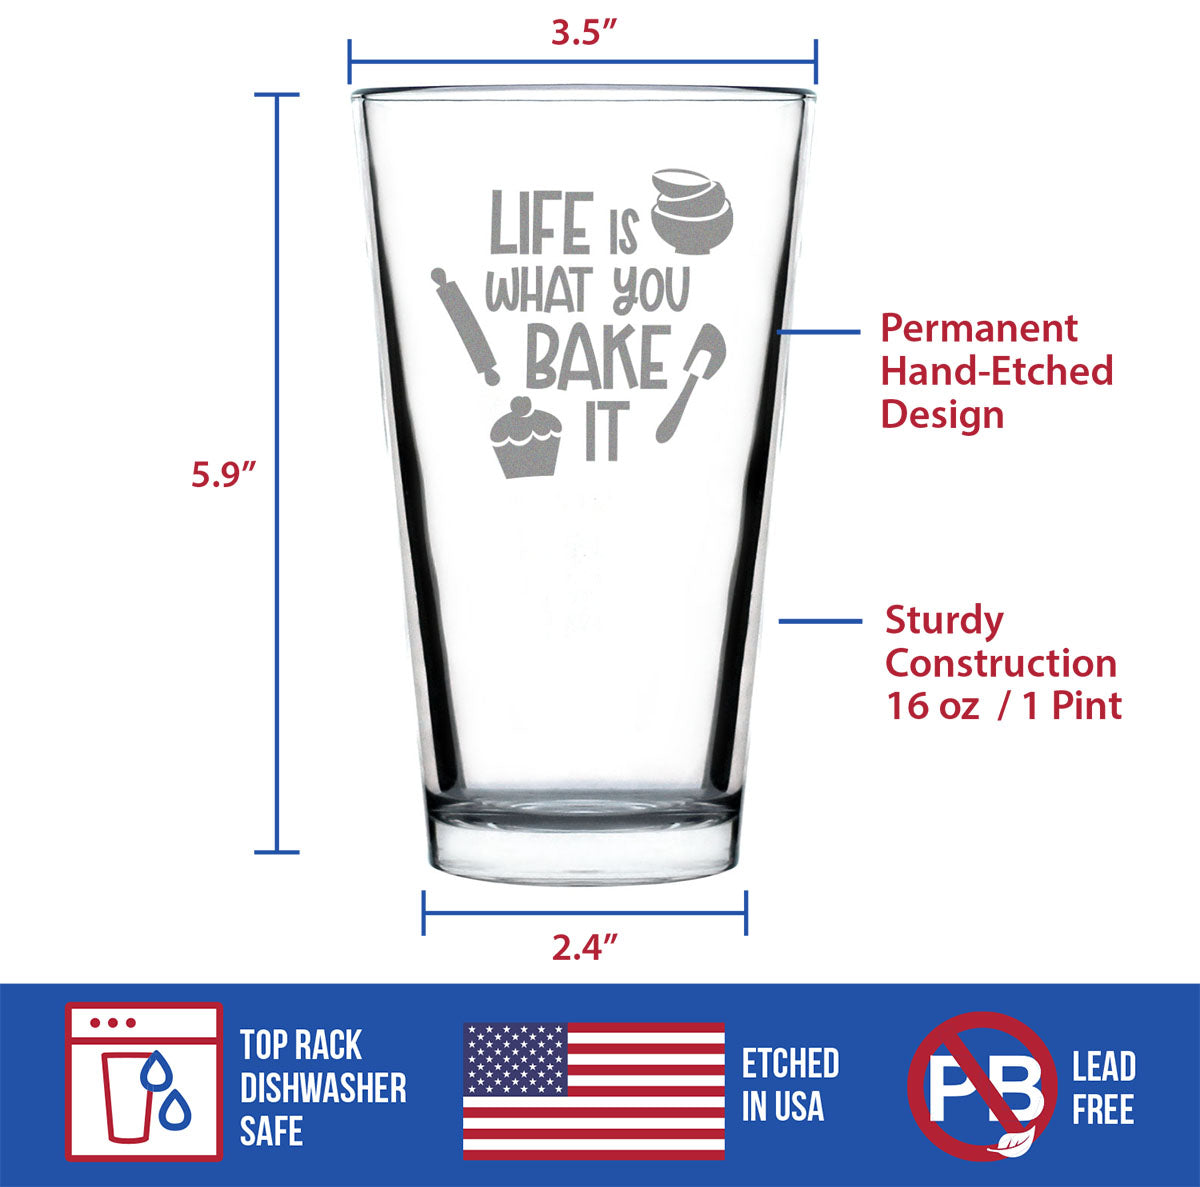 Life Is What You Bake It - Pint Glass for Beer - Funny Baking Themed Decor and Gifts for Bakers - 16 oz Glasses